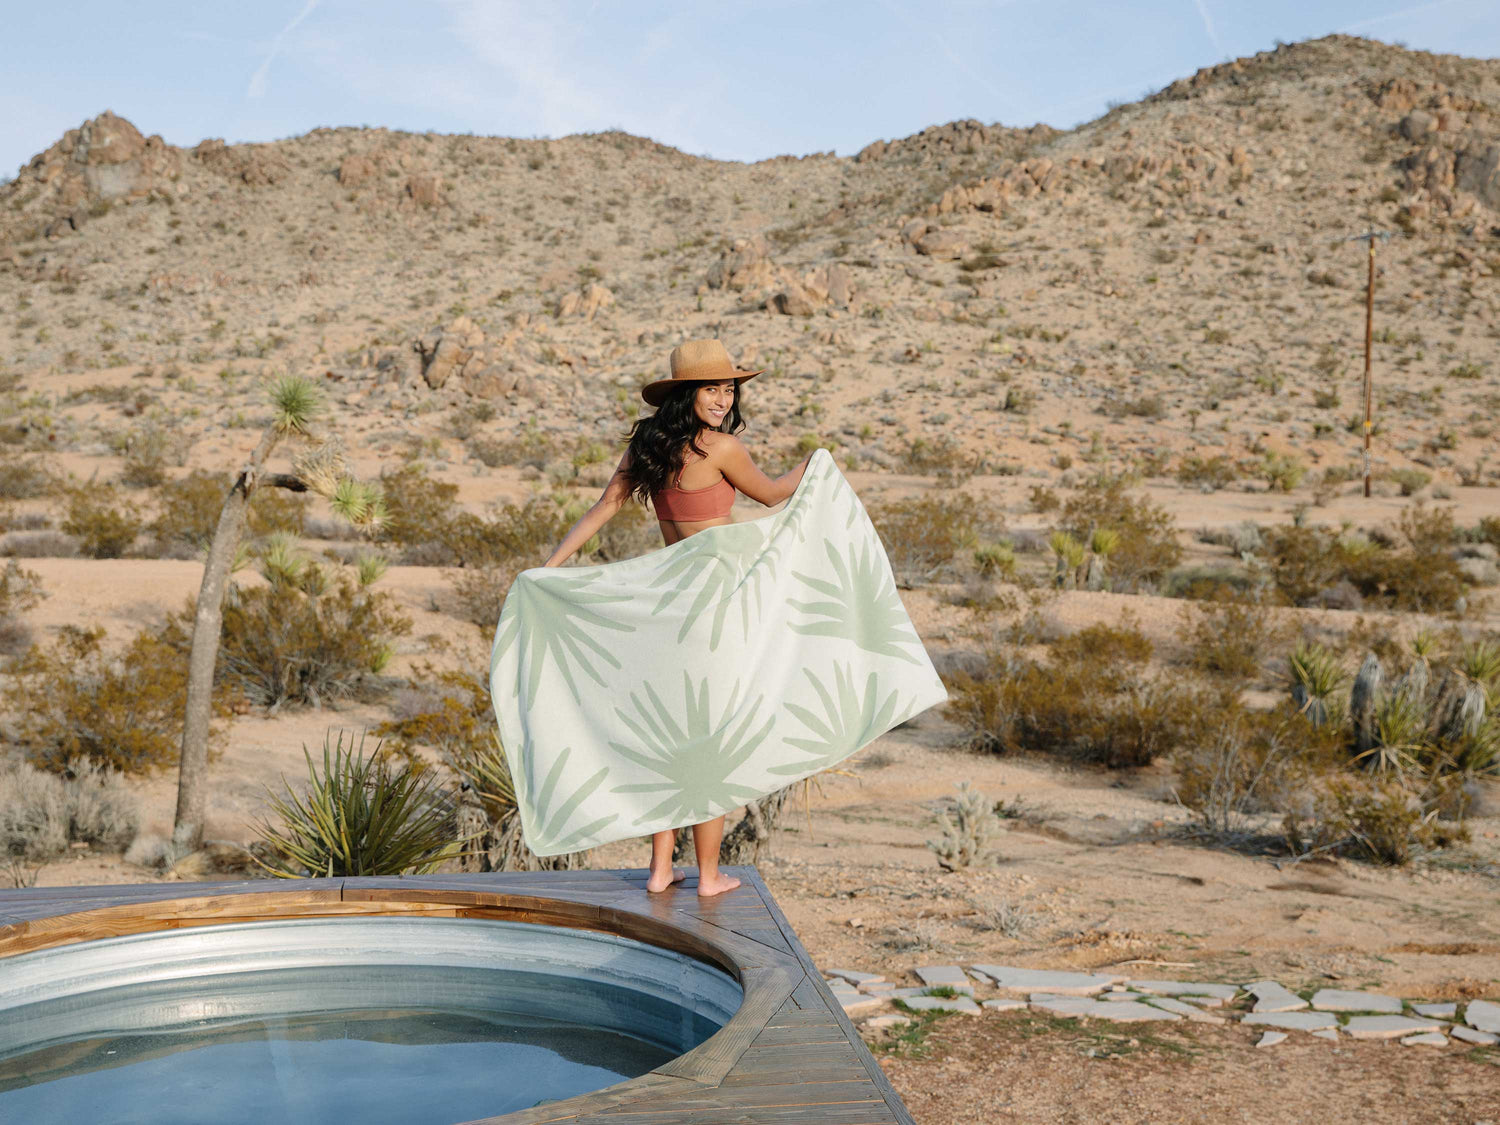 
      A woman wearing a hat looking backward, standing beside a jacuzzi in the desert and holding out a white and green tropical patterned beach towel.
    